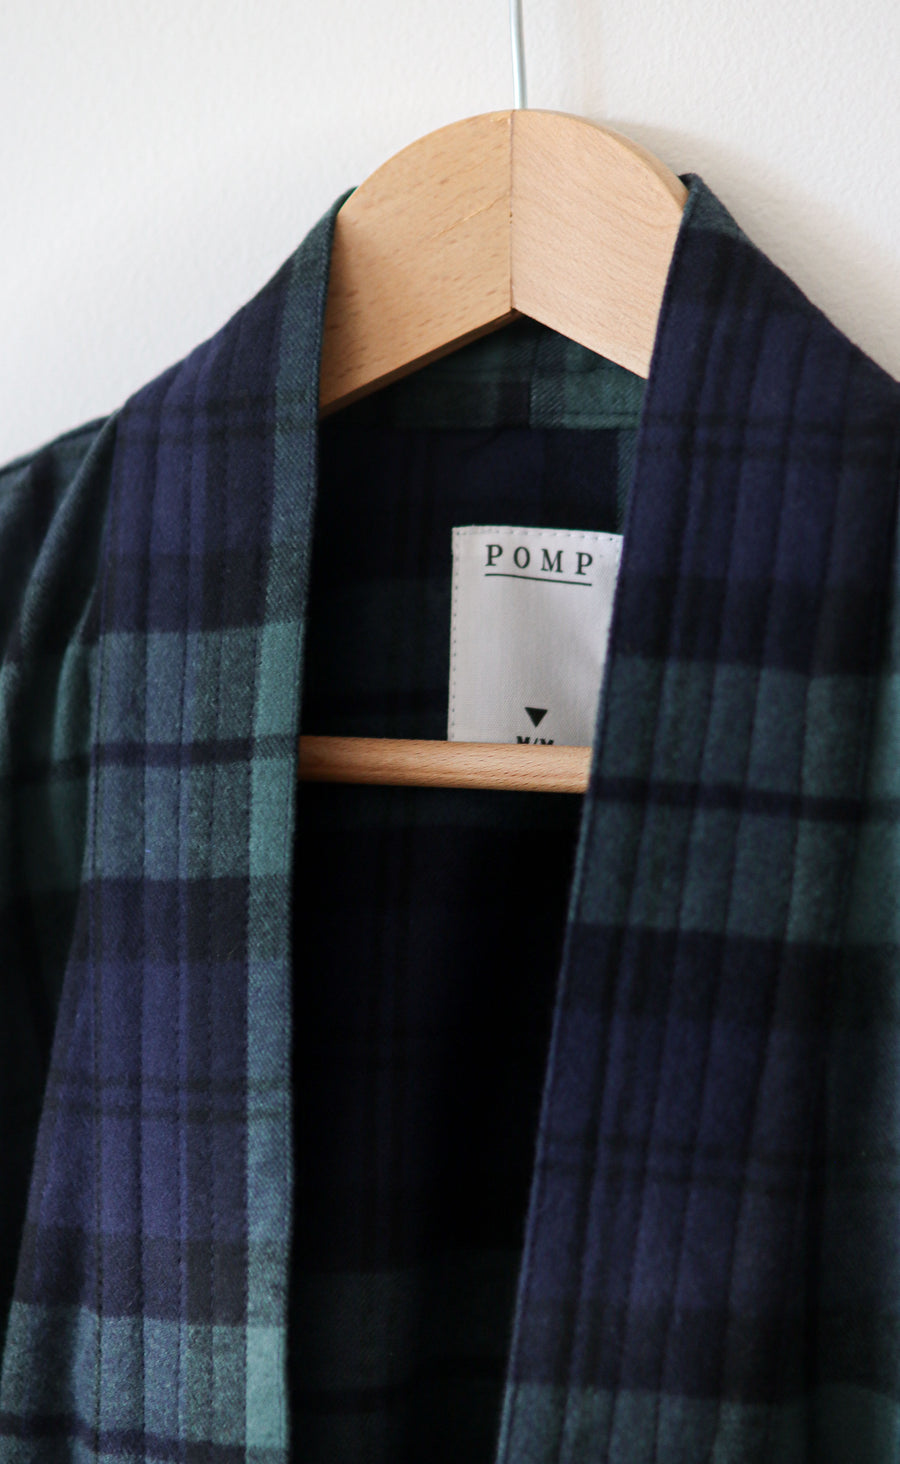 The Voyager - Long Sleeve Duster Coat - Heavy Flannel